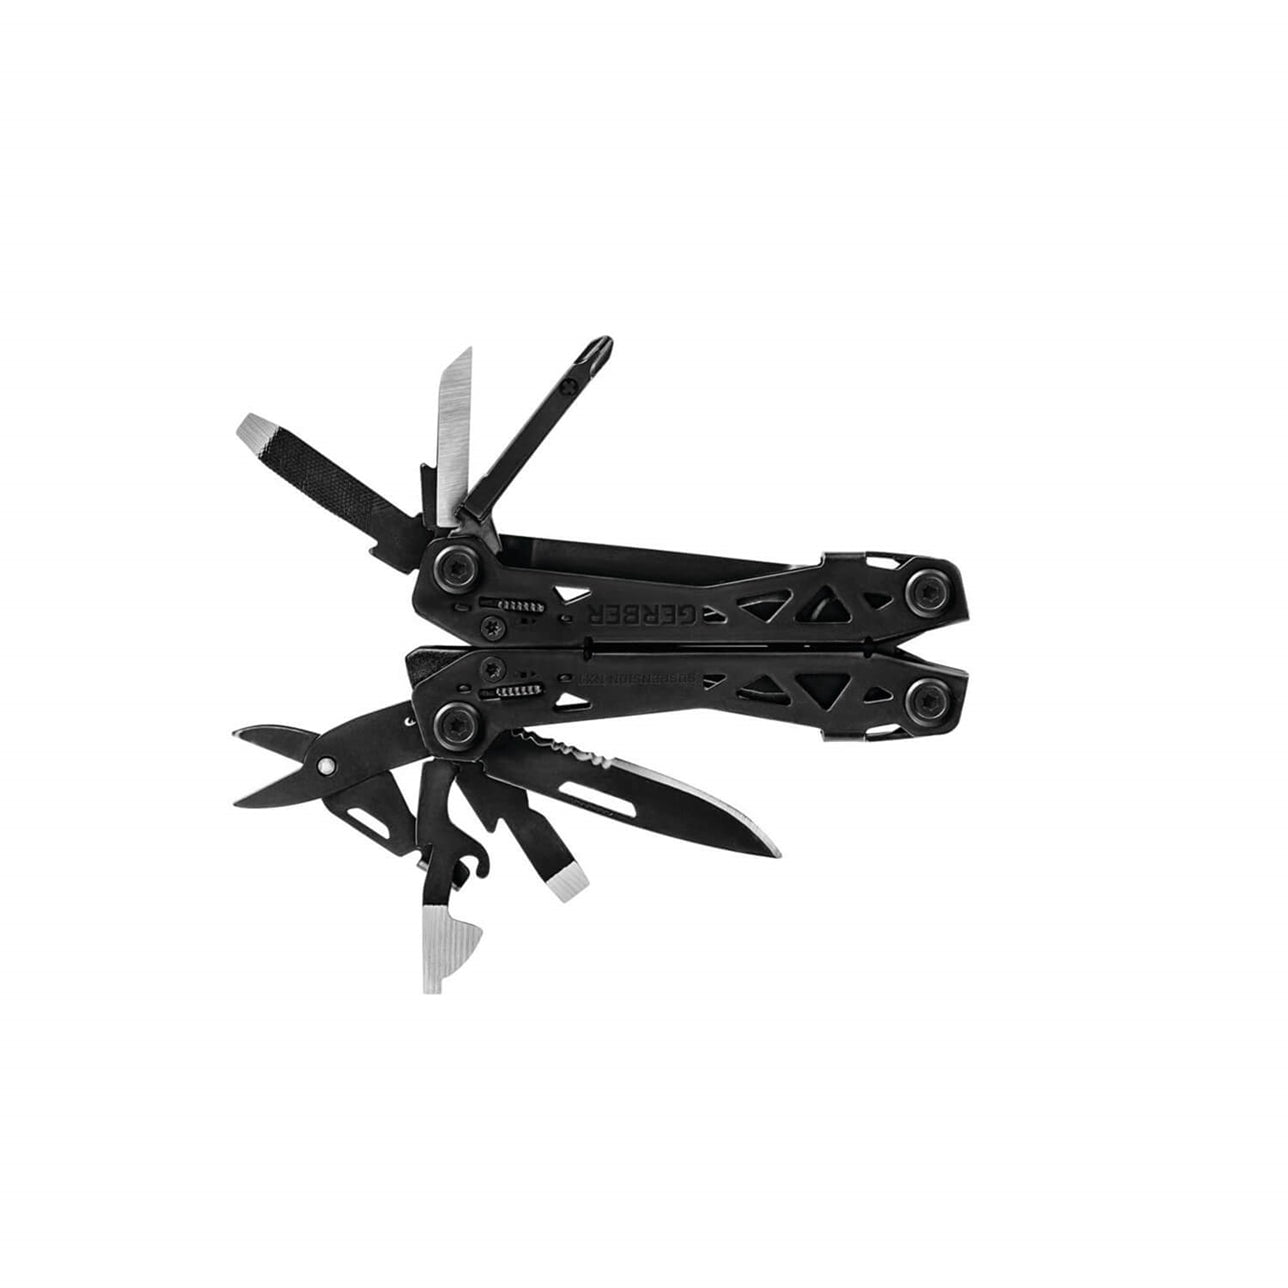 gerber suspension nxt full size multitool for sale near alice orange grove texas at hawkes outdoors 2102512882